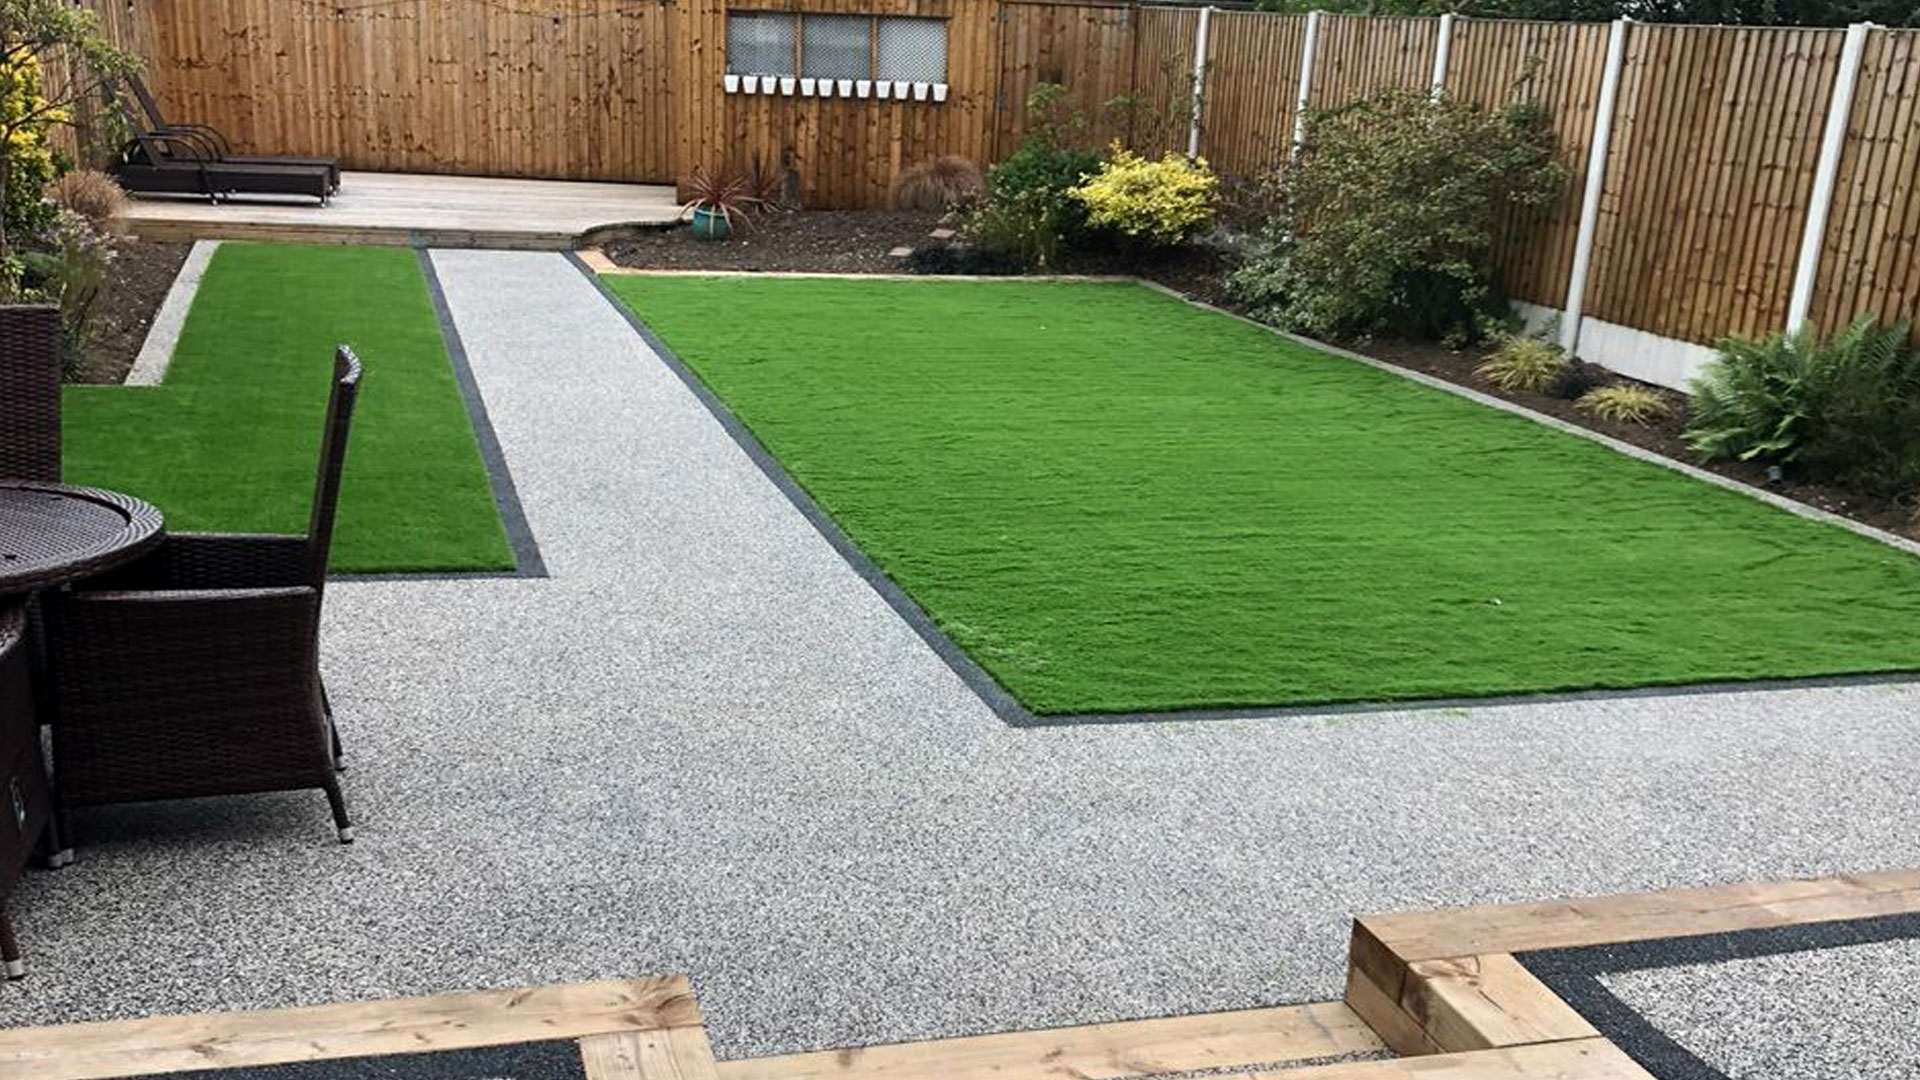 Supreme Resin Driveways - We create luxury outdoor living spaces. It is time to transform your garden into a space to be enjoyed. Our talented garden designers in Manchester are equipped with the skill required to create unique spaces. When we design a garden, it will always be crafted to withstand the tests of time. Whether you are looking for a modern design or would prefer something a little more traditional, our landscapers in Manchester can create a bespoke design for your unique requirements.